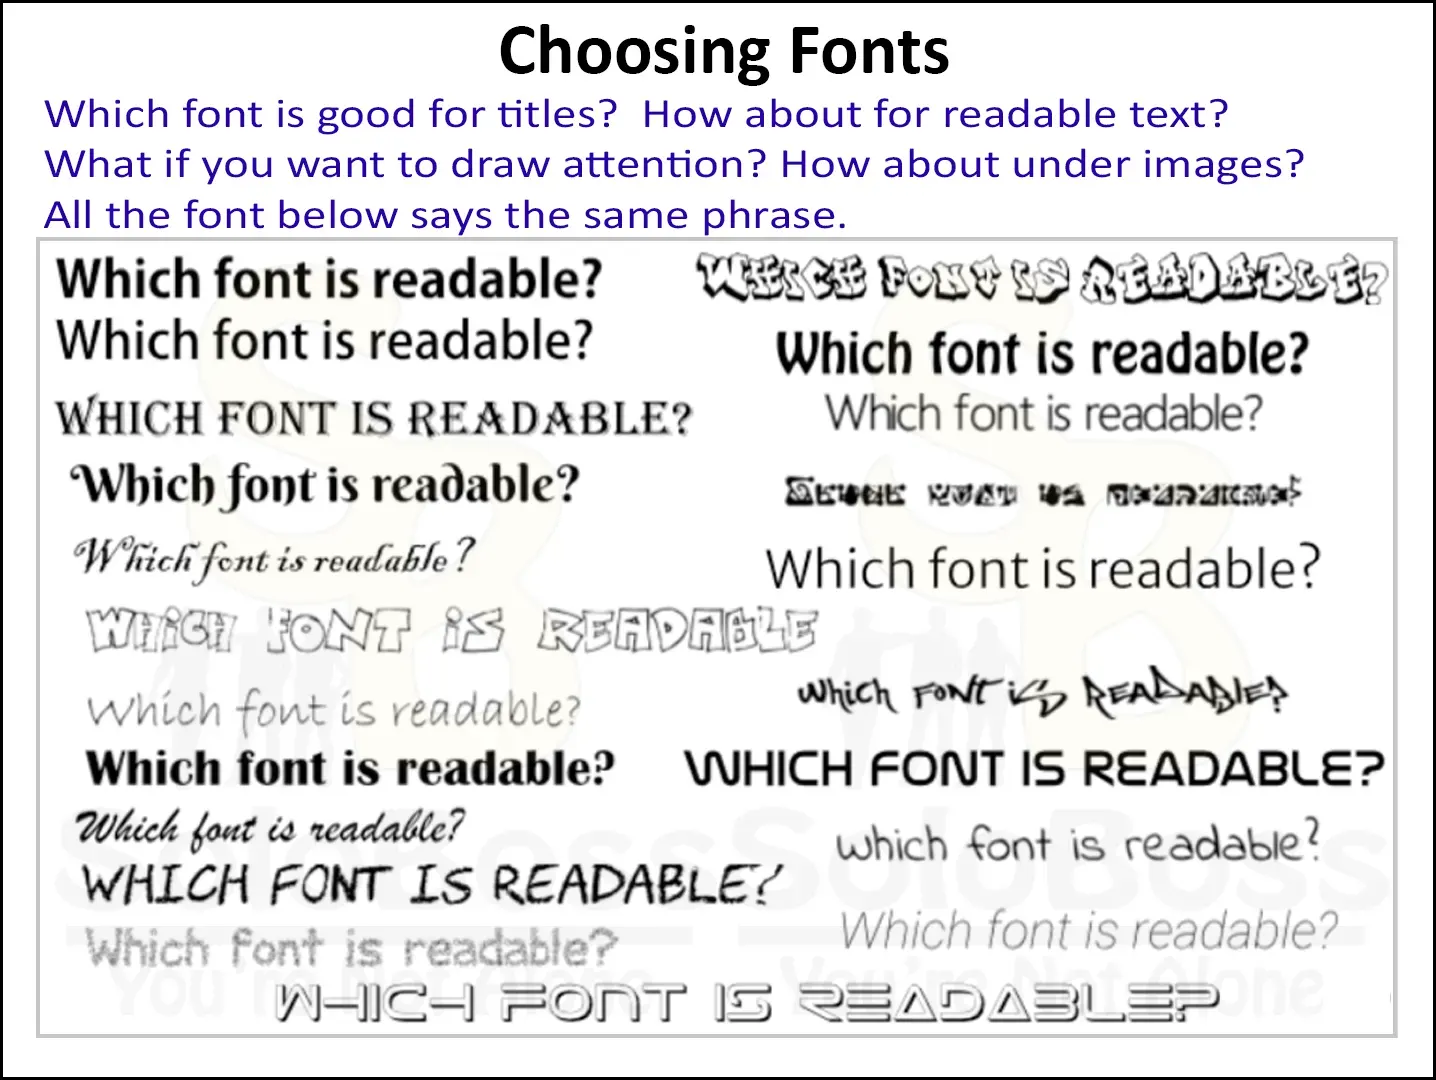 Shows various fonts and asks which fonts are easy to read when choosing fonts for a Doodly video.